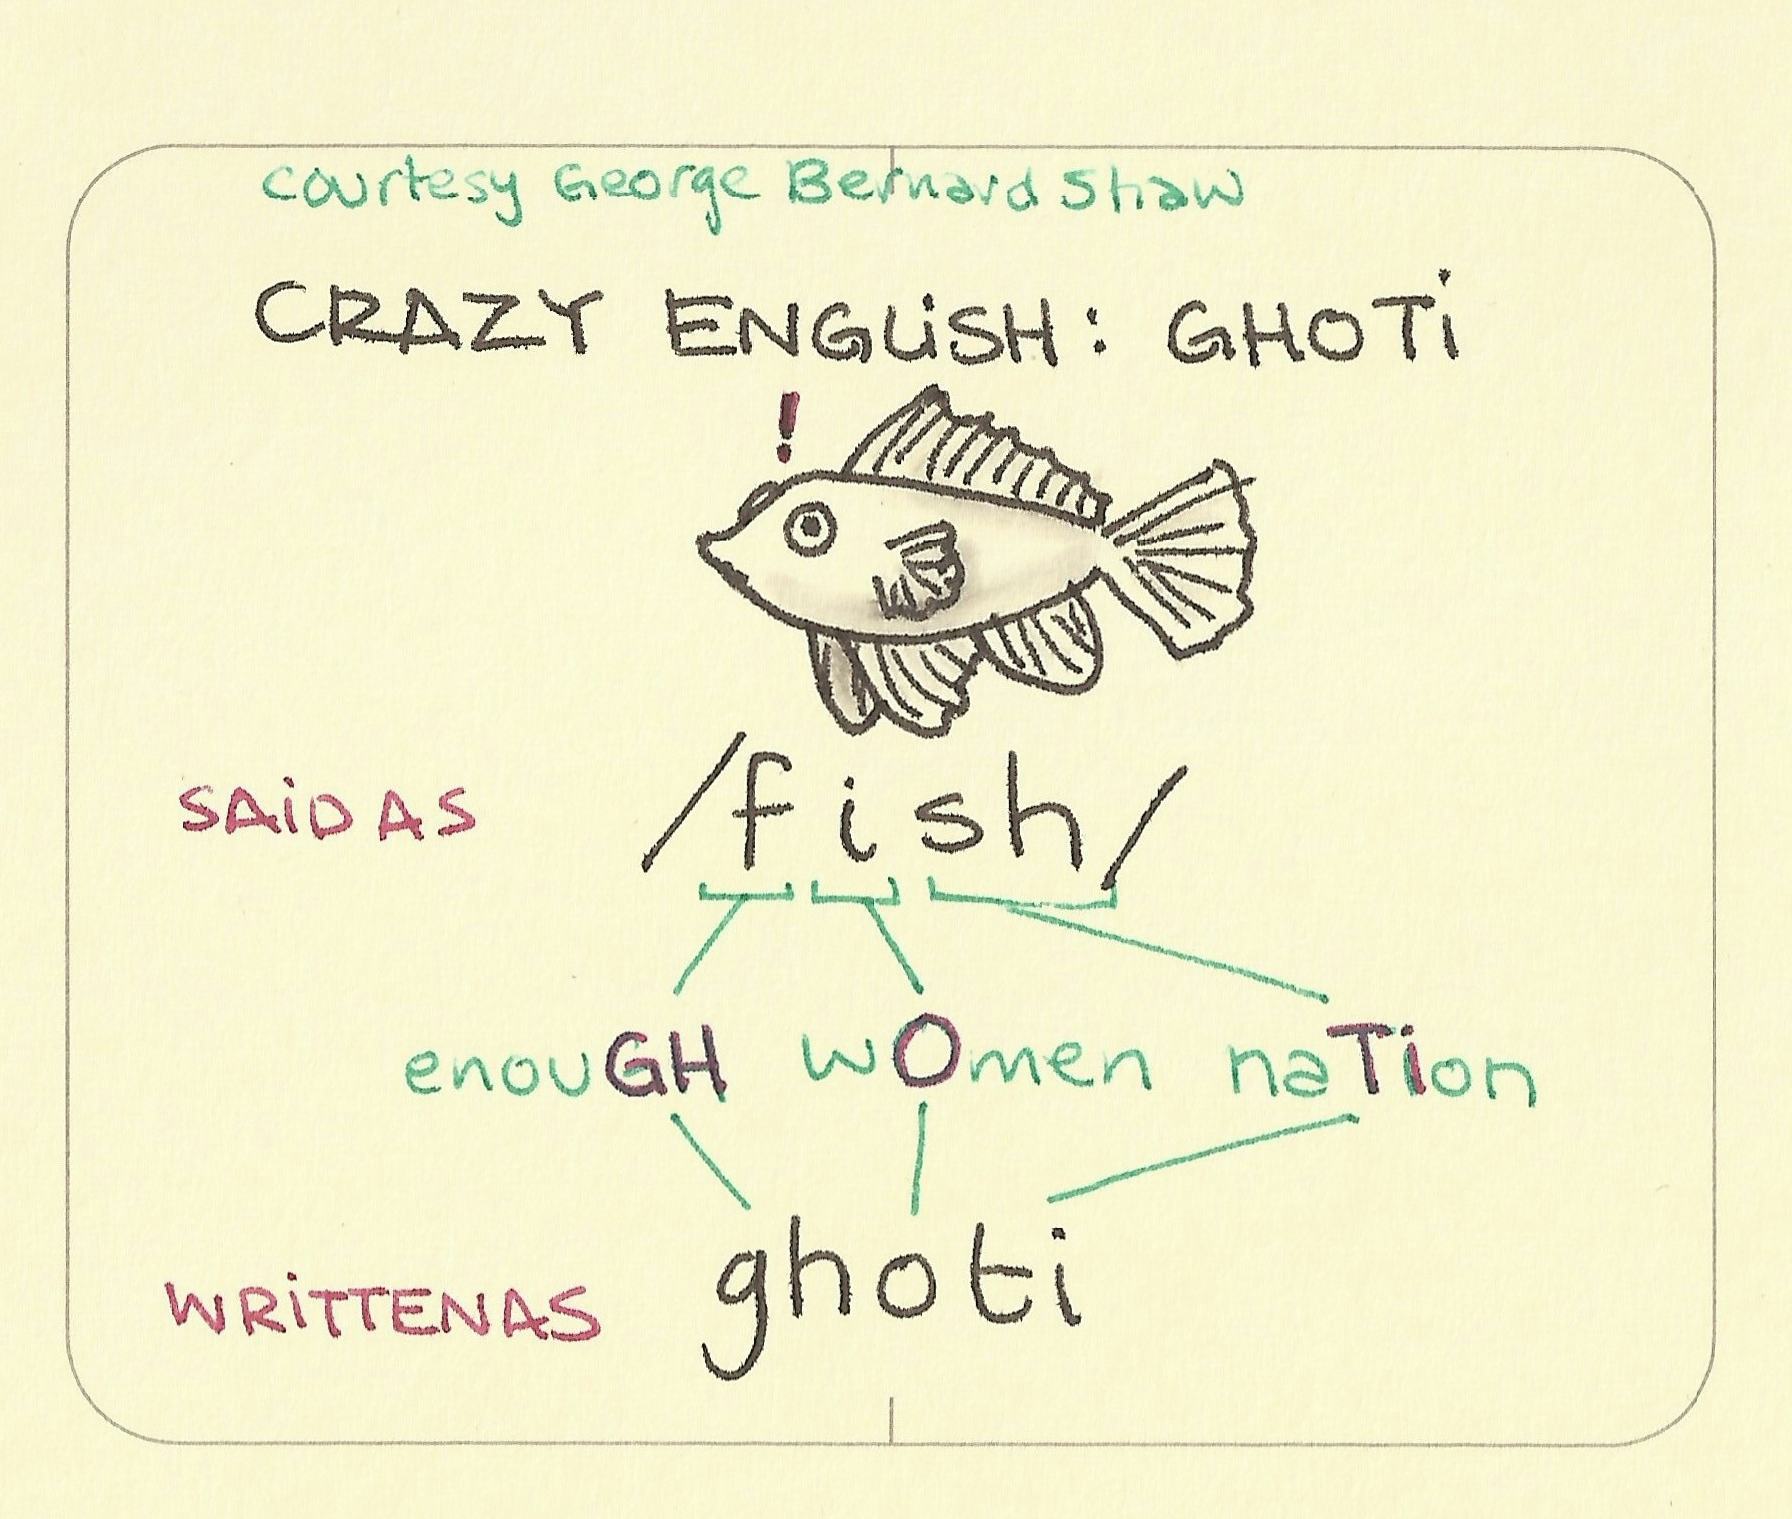 ghoti illustration: how crazy the English language can be showing that ghoti could be pronounced fish